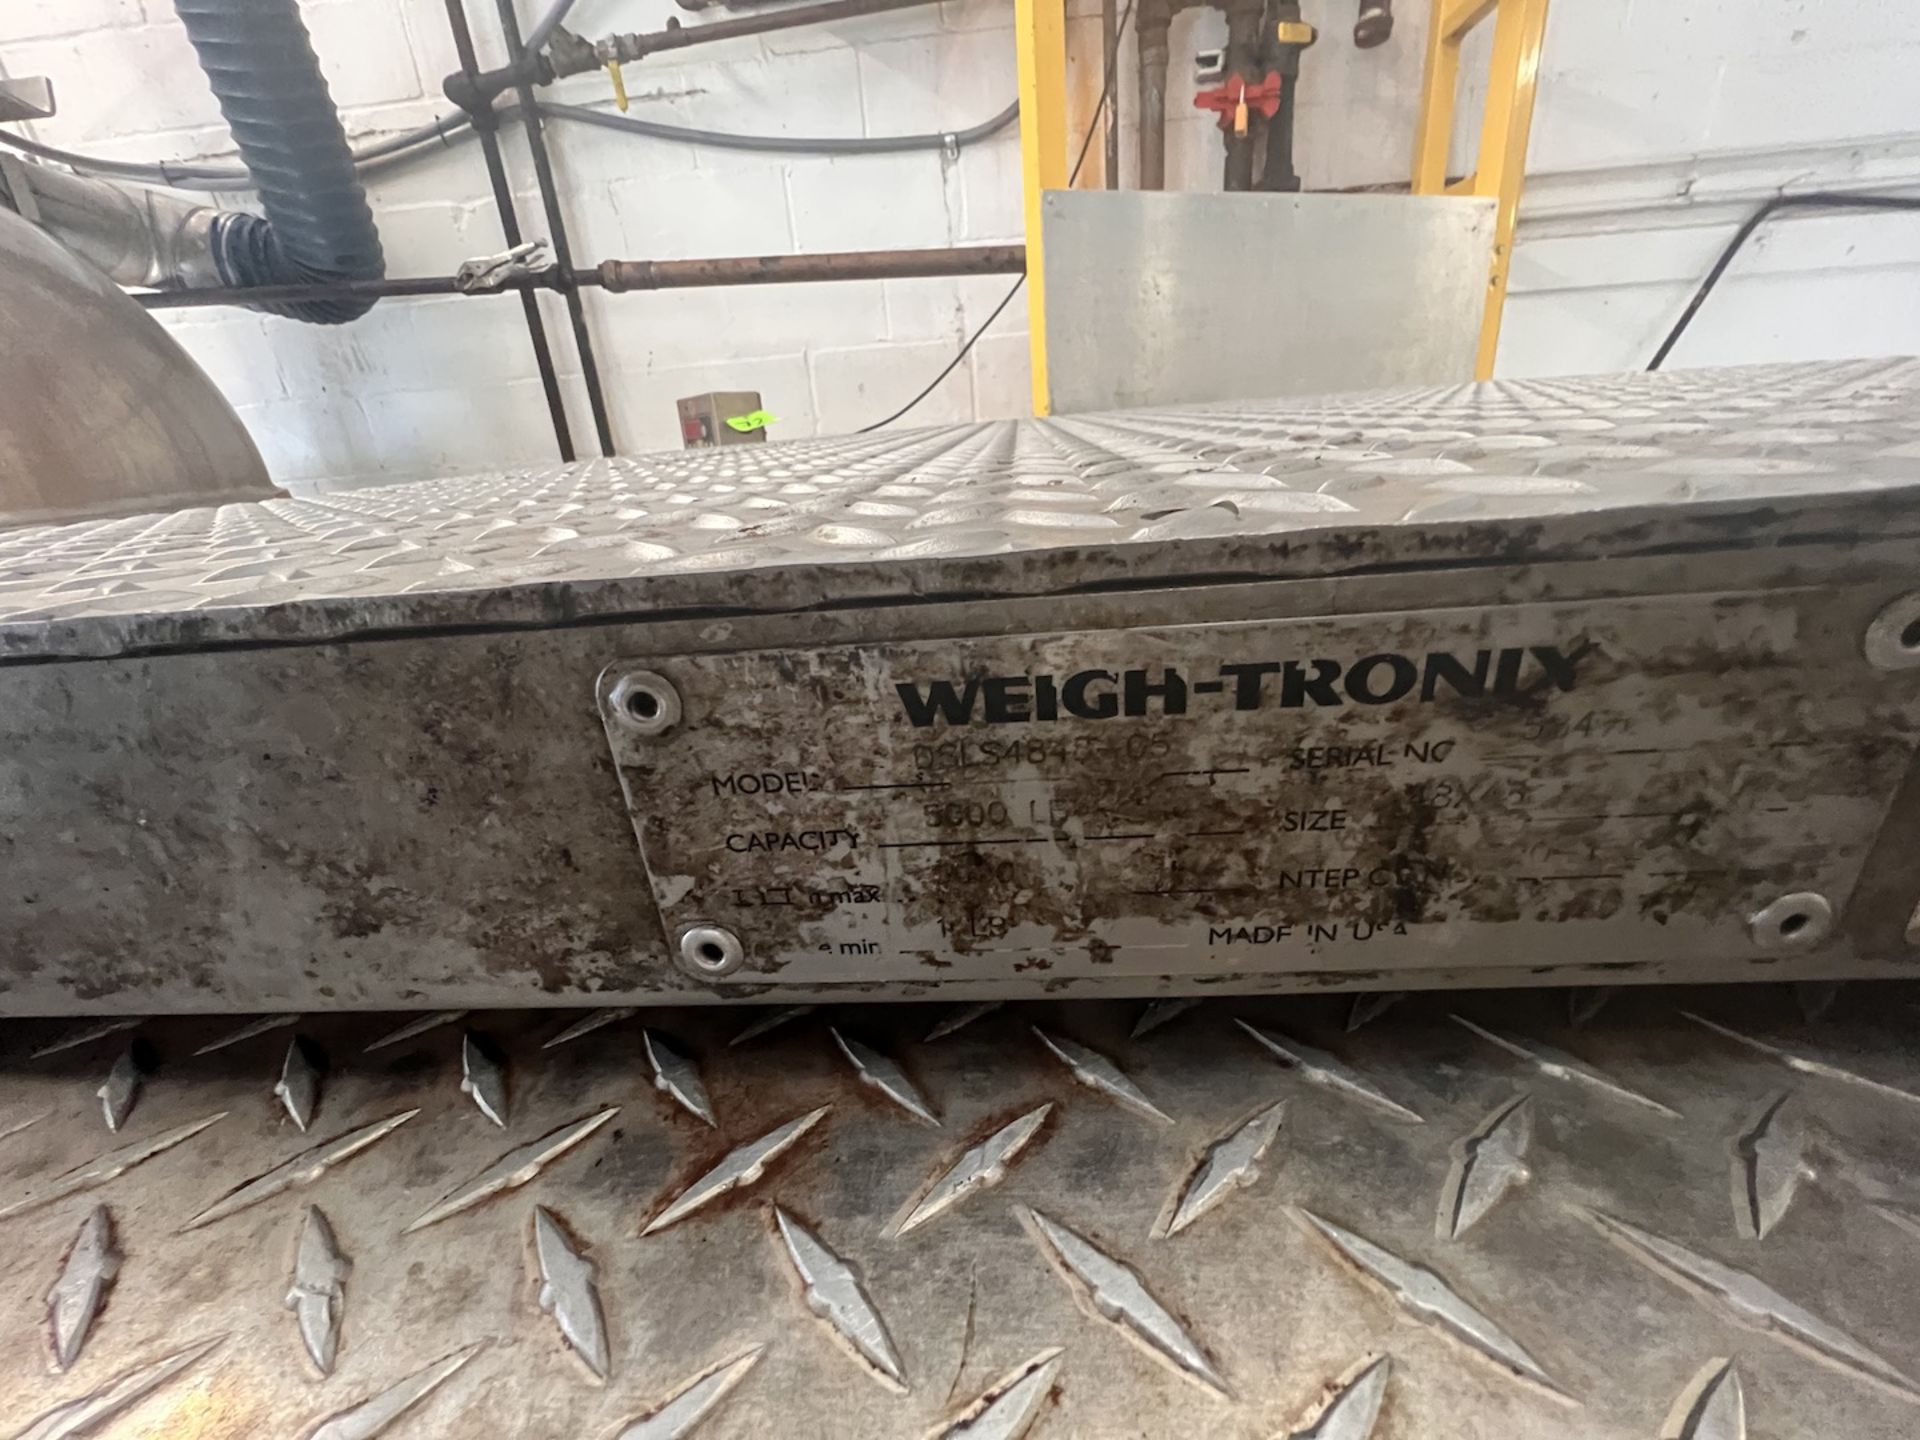 WEIGH-TRONIX S/S FLOOR SCALE WITH DIGITAL READ-OUT, MODEL DSLS4848-05, S/N 58472, 5,000 LB CAPACITY, - Image 9 of 11